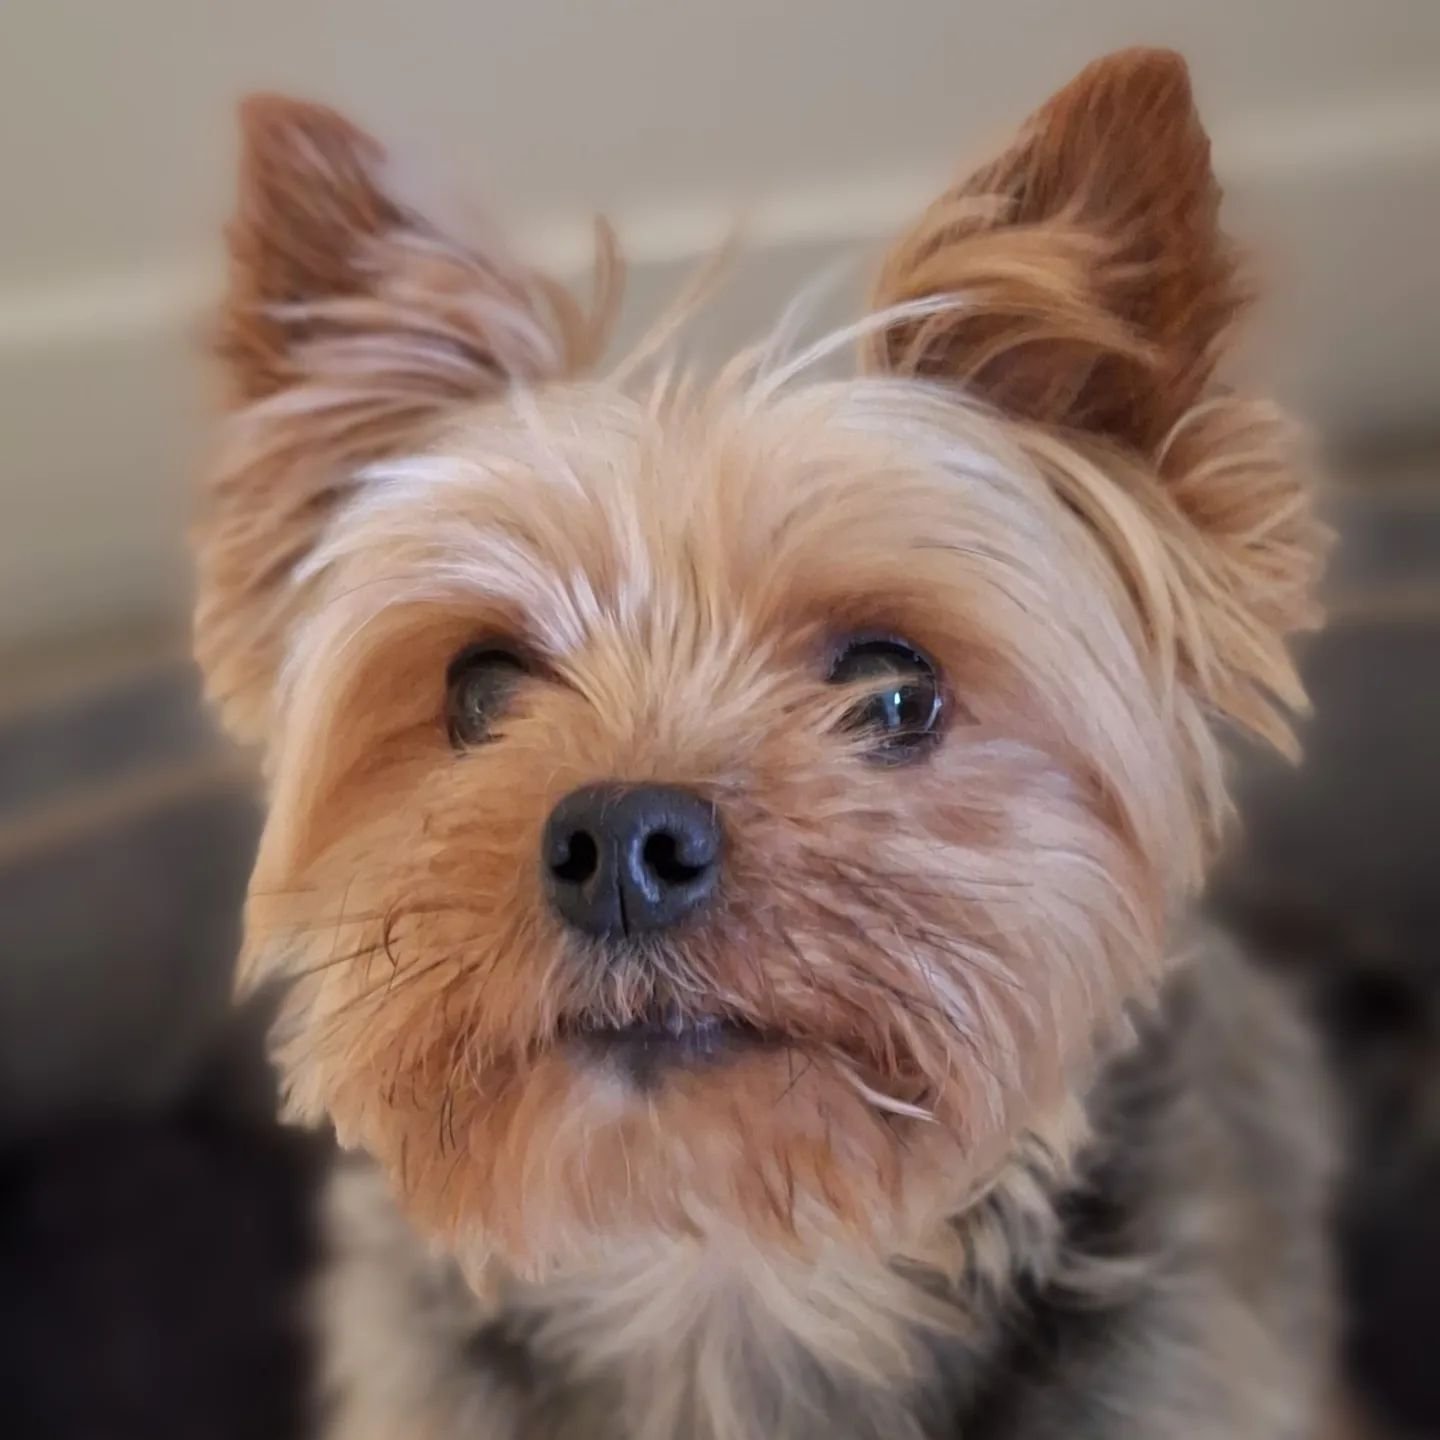 Looking forward to spending time with our little Yorkie this week.....
.
.
.
.
.
.
#yorkshireterrier #yorki #yorkie #yorkielife  #yorkielove #yorkiegram #yorkielover #yorkienation #terrier #terriersofinstagram #dog #dogs #dogsofinstagram #love #dogsi